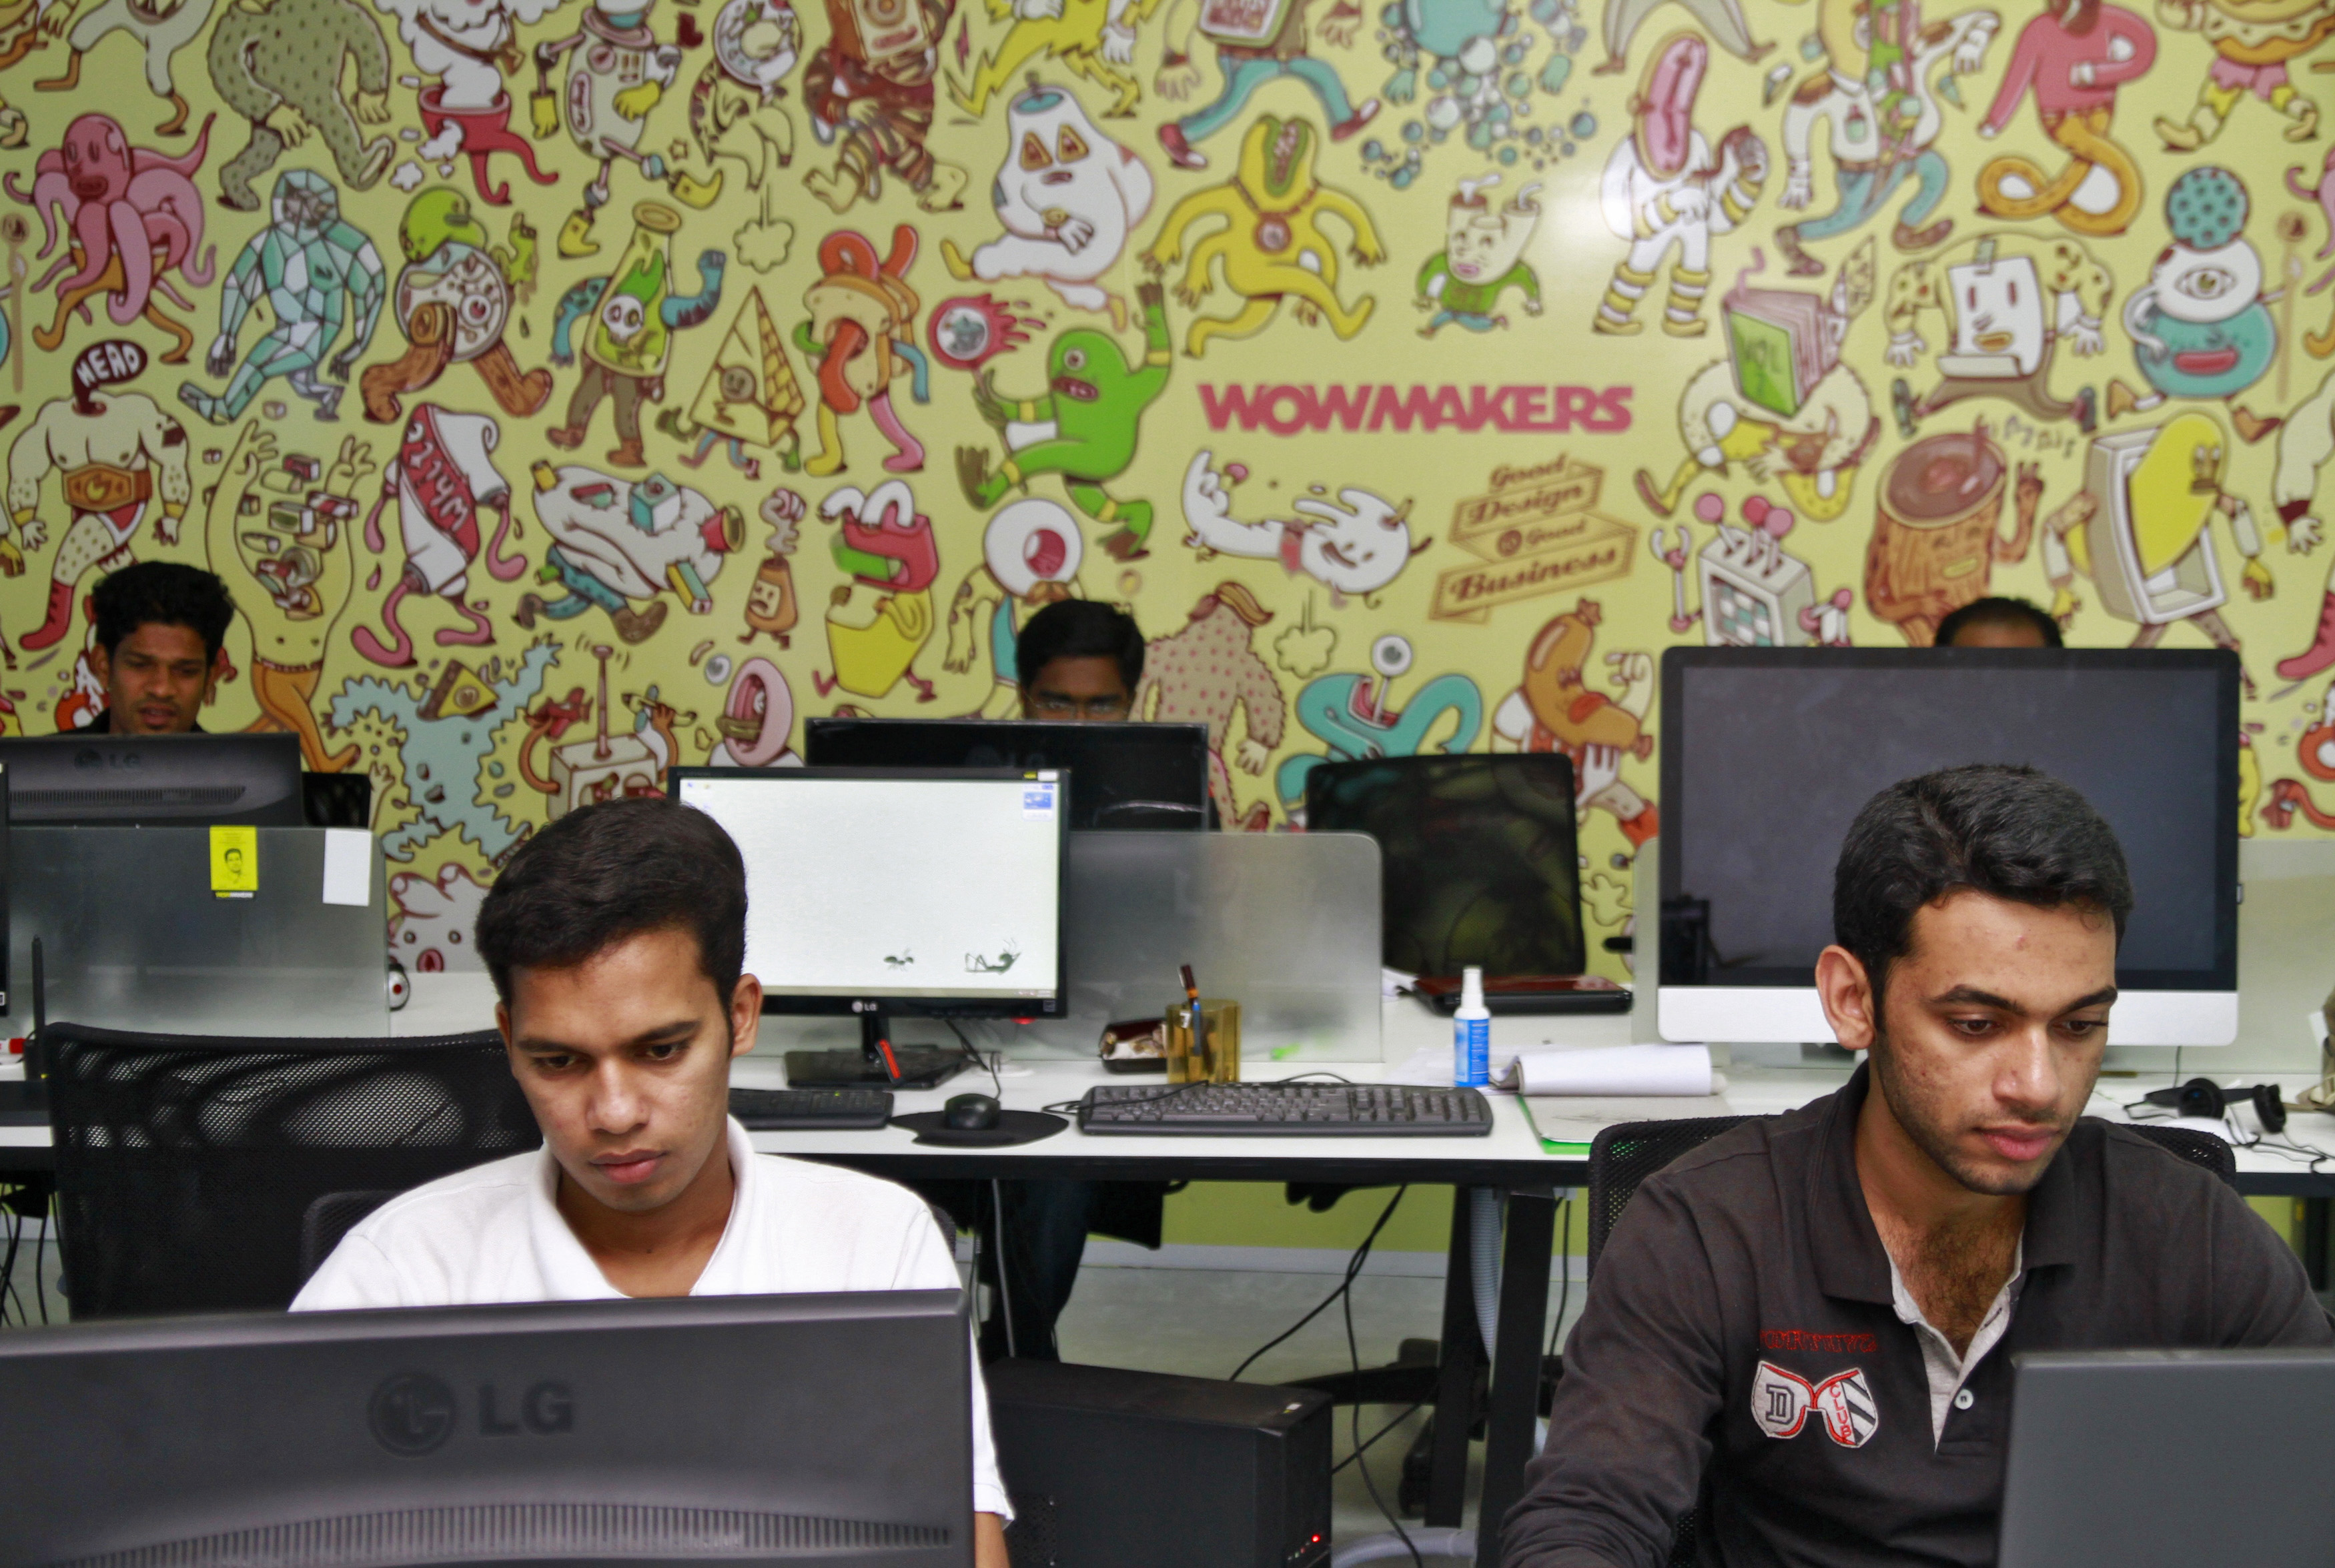 Design artists work on their computer terminals at the Start-up Village in Kinfra High Tech Park in Kochi